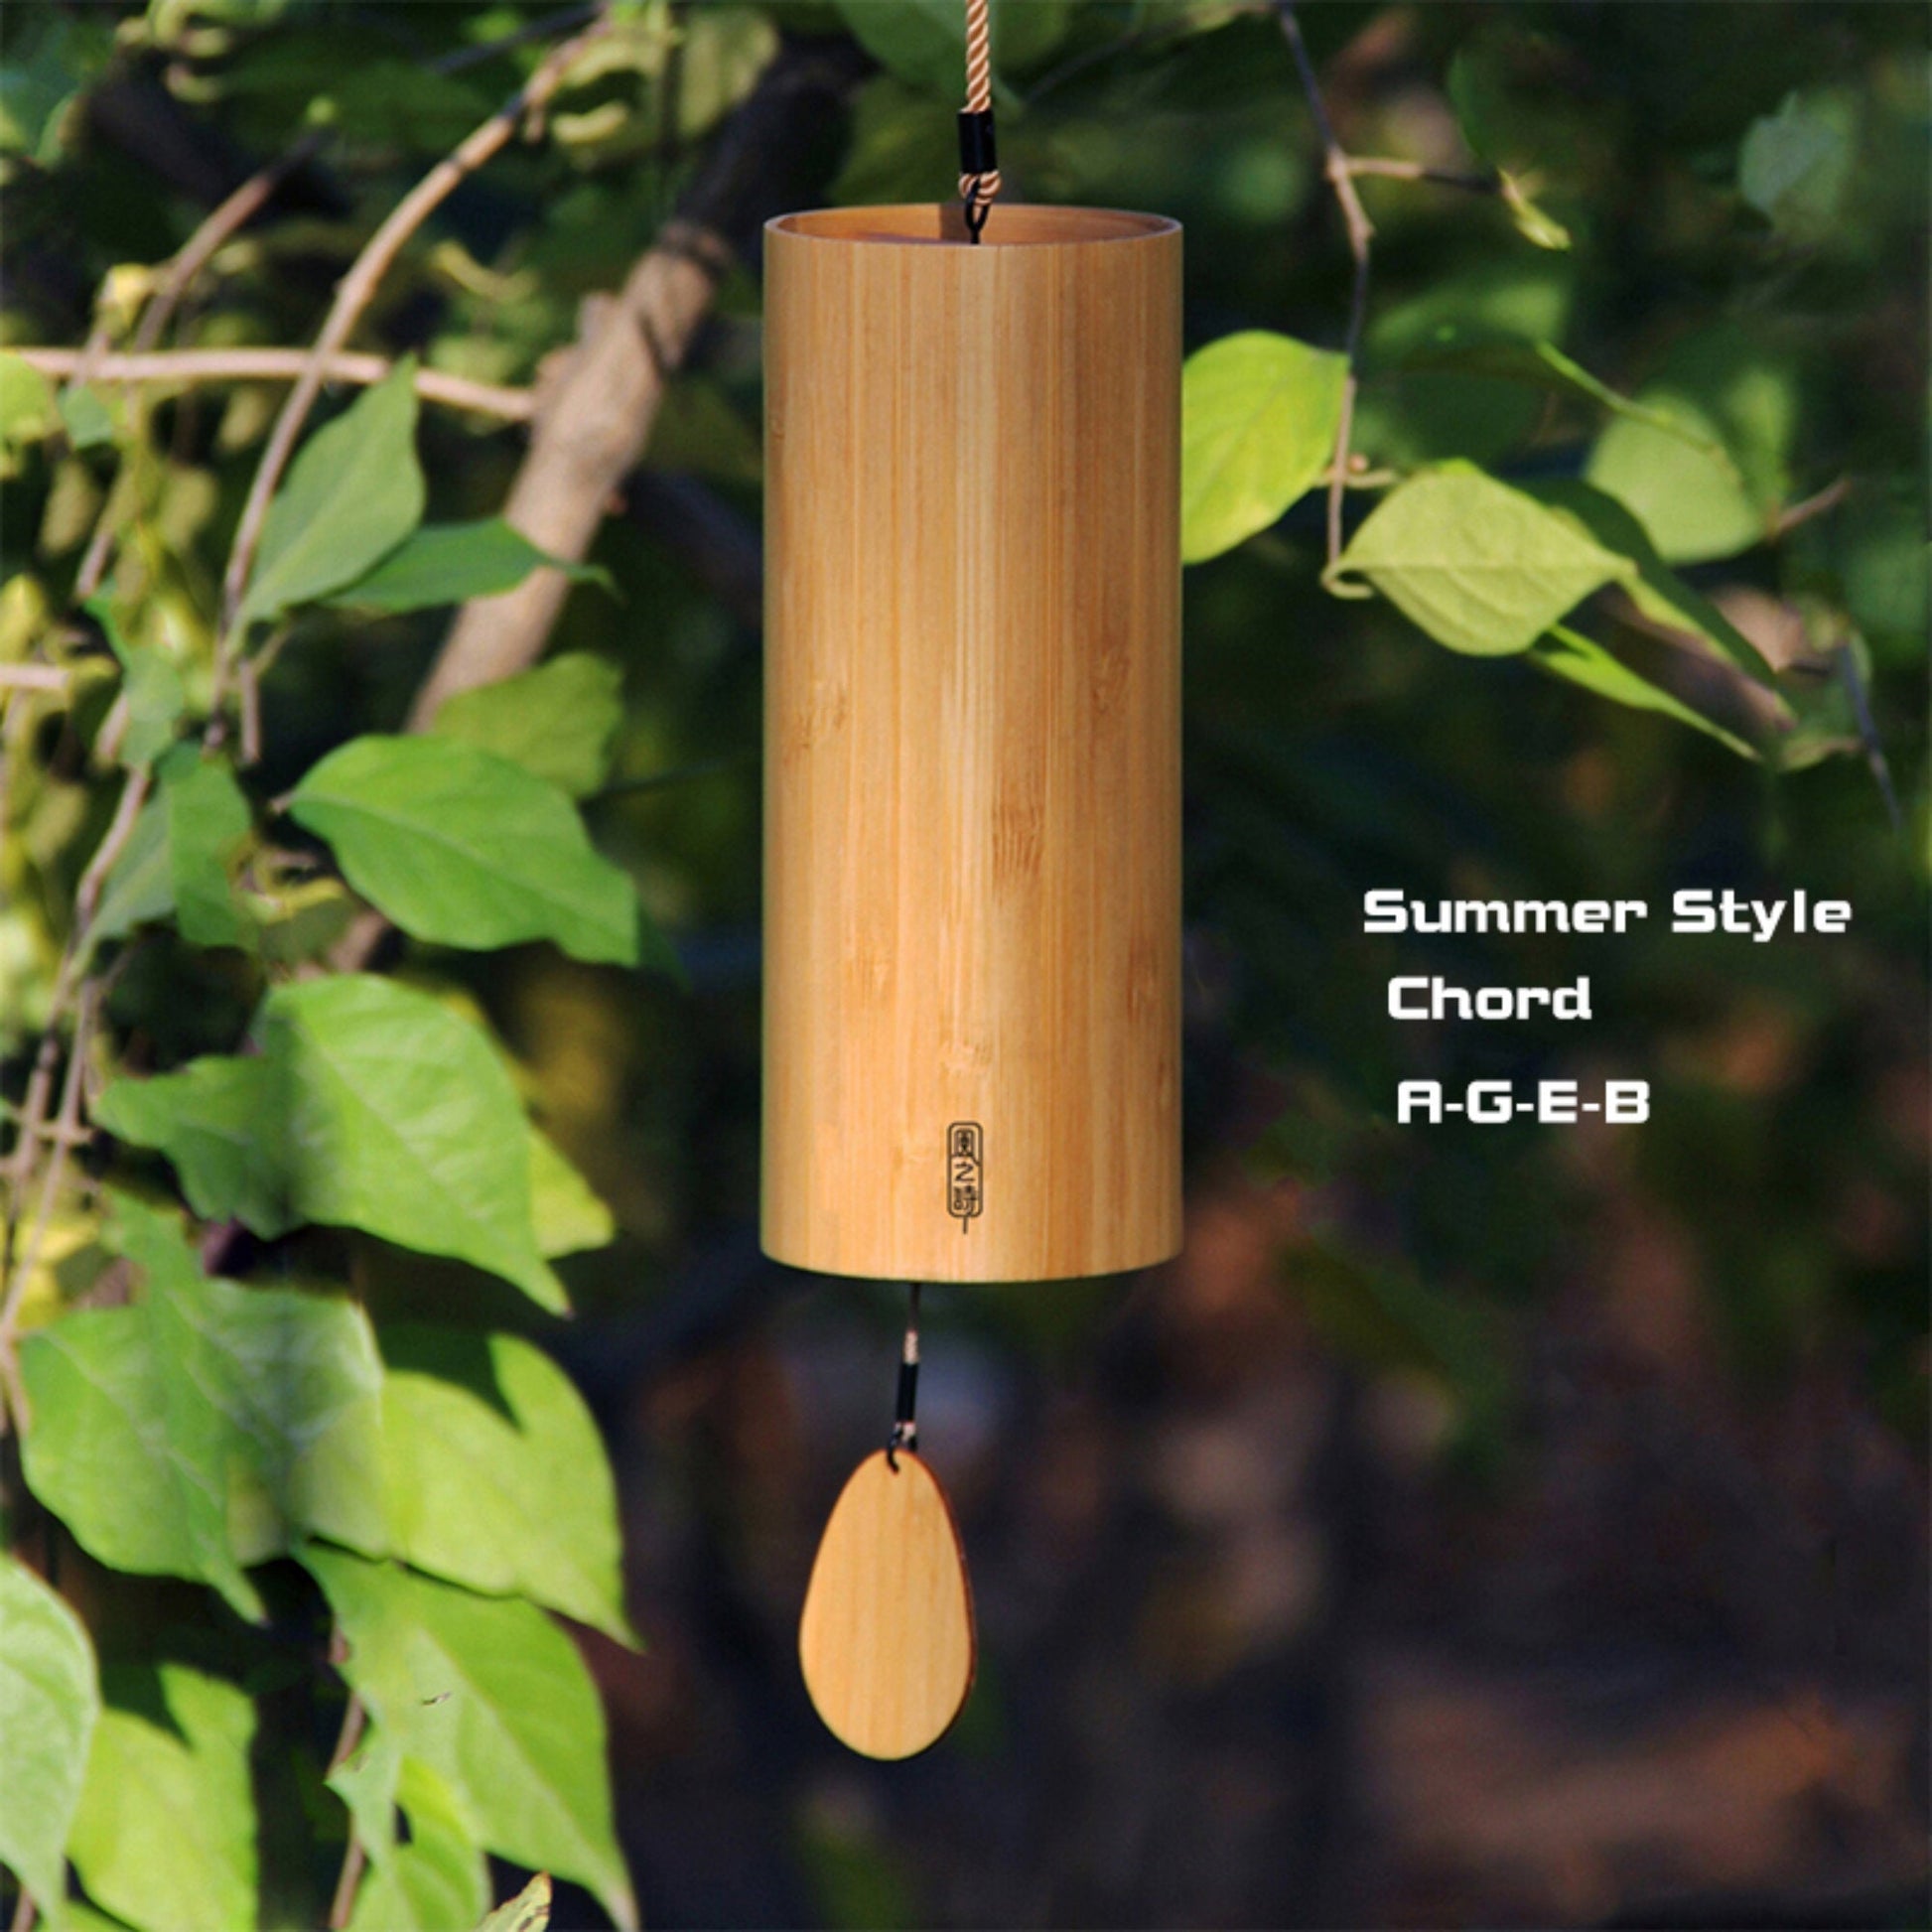 Bamboo Wind Chime 4 Different Melodies | Wind Chimes for Outdoors, Japanese Wind Chime, Zen Garden, Bamboo Wind Chimes, Garden, Patio - -